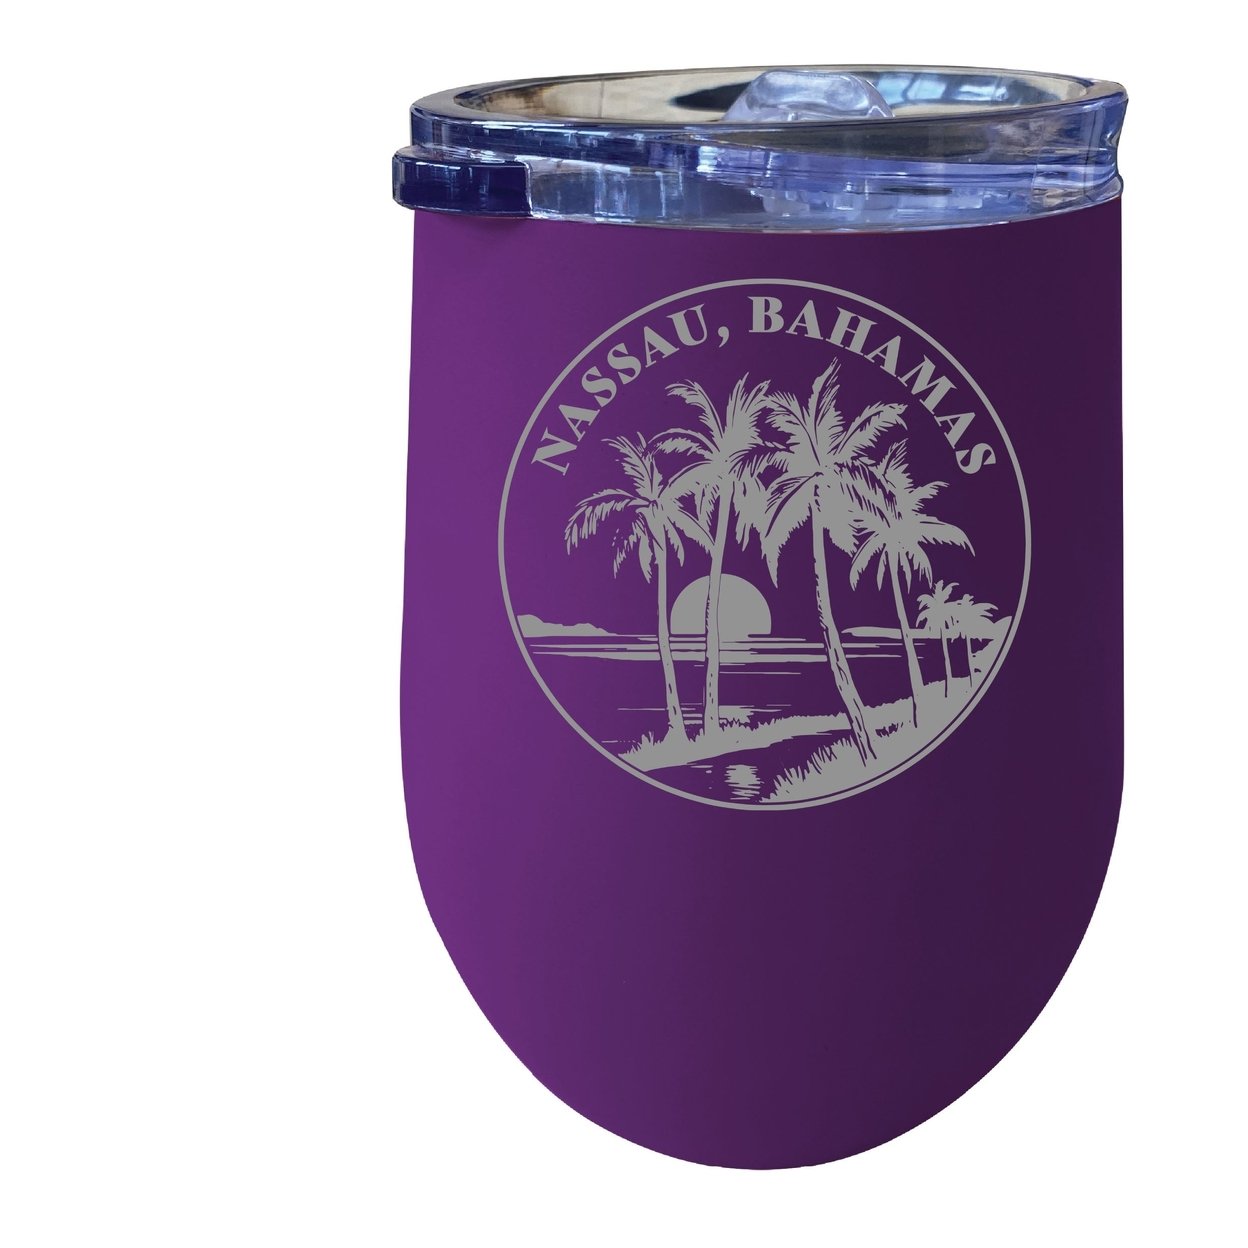 Nassau The Bahamas Souvenir 12 Oz Engraved Insulated Wine Stainless Steel Tumbler - Purple,,2-Pack